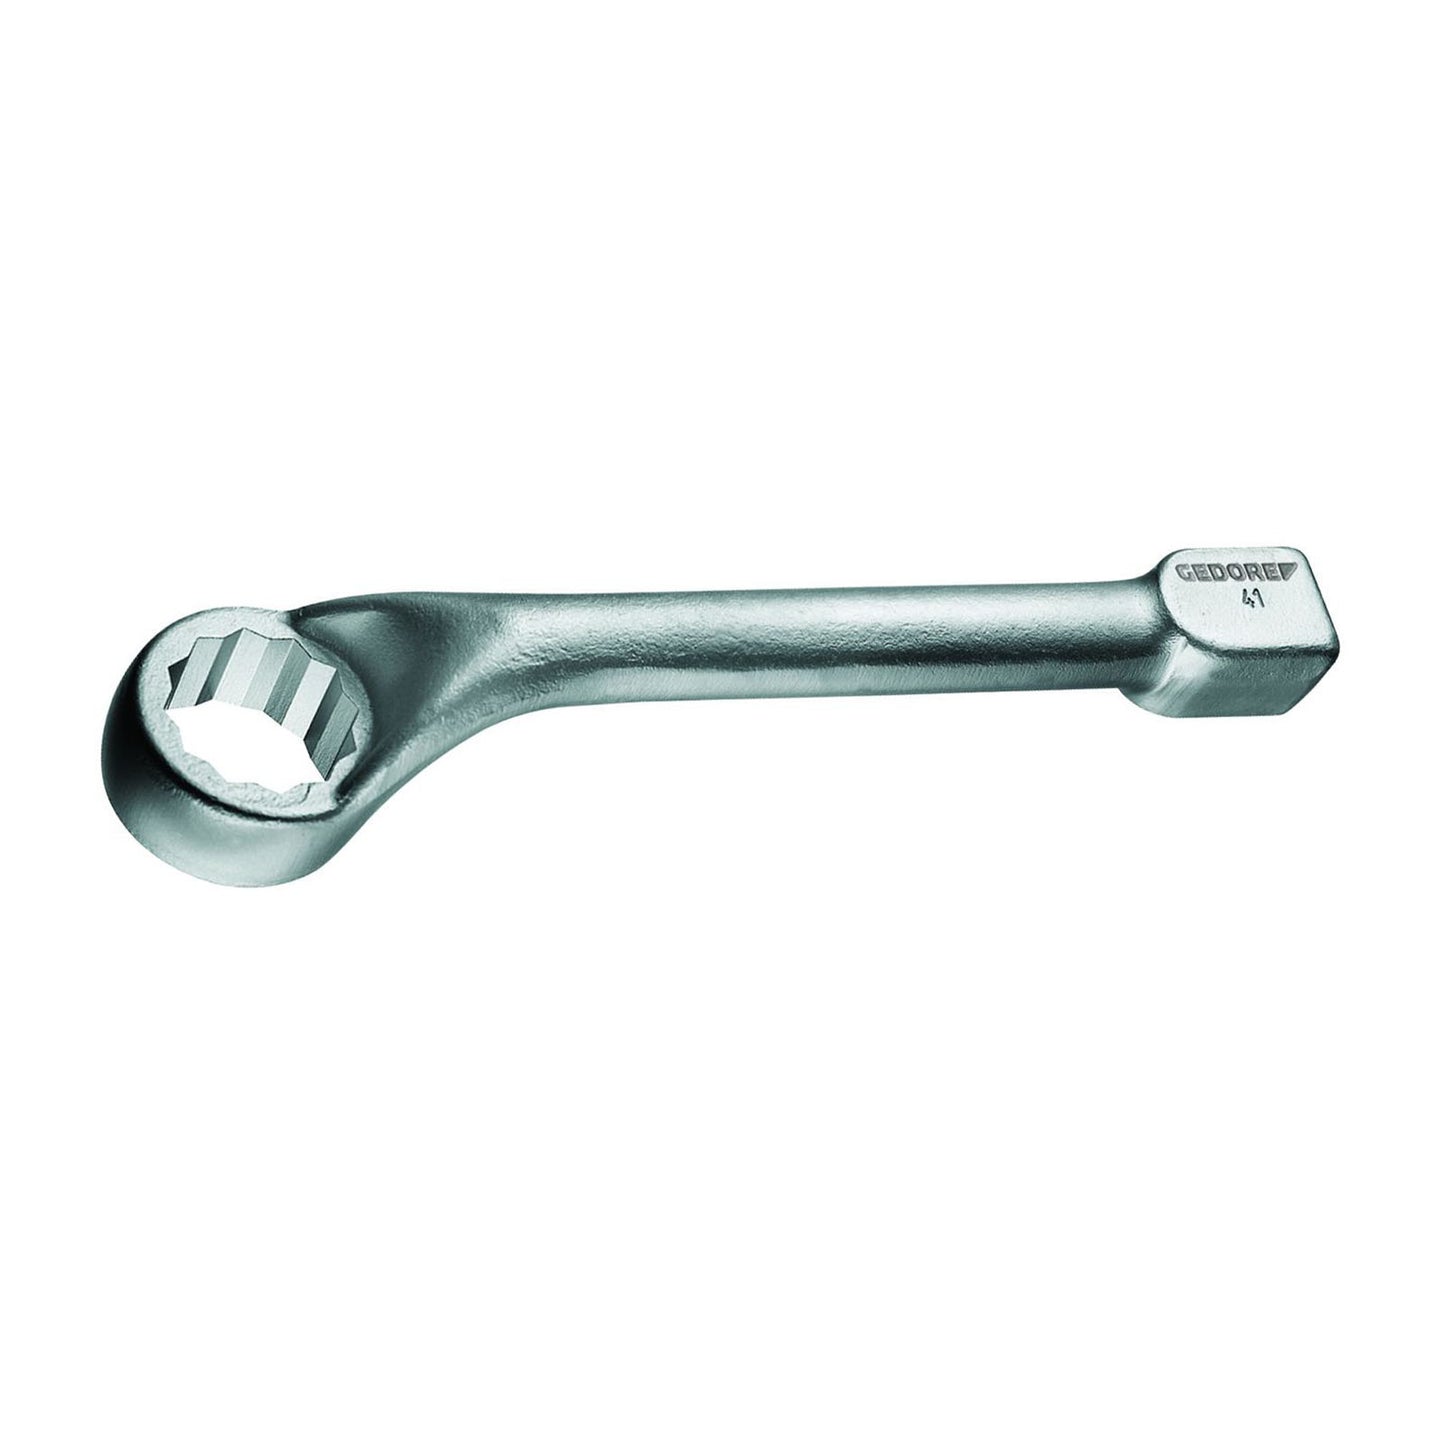 GEDORE 306 G 50 - Offset Wrench, 50mm (1416197)